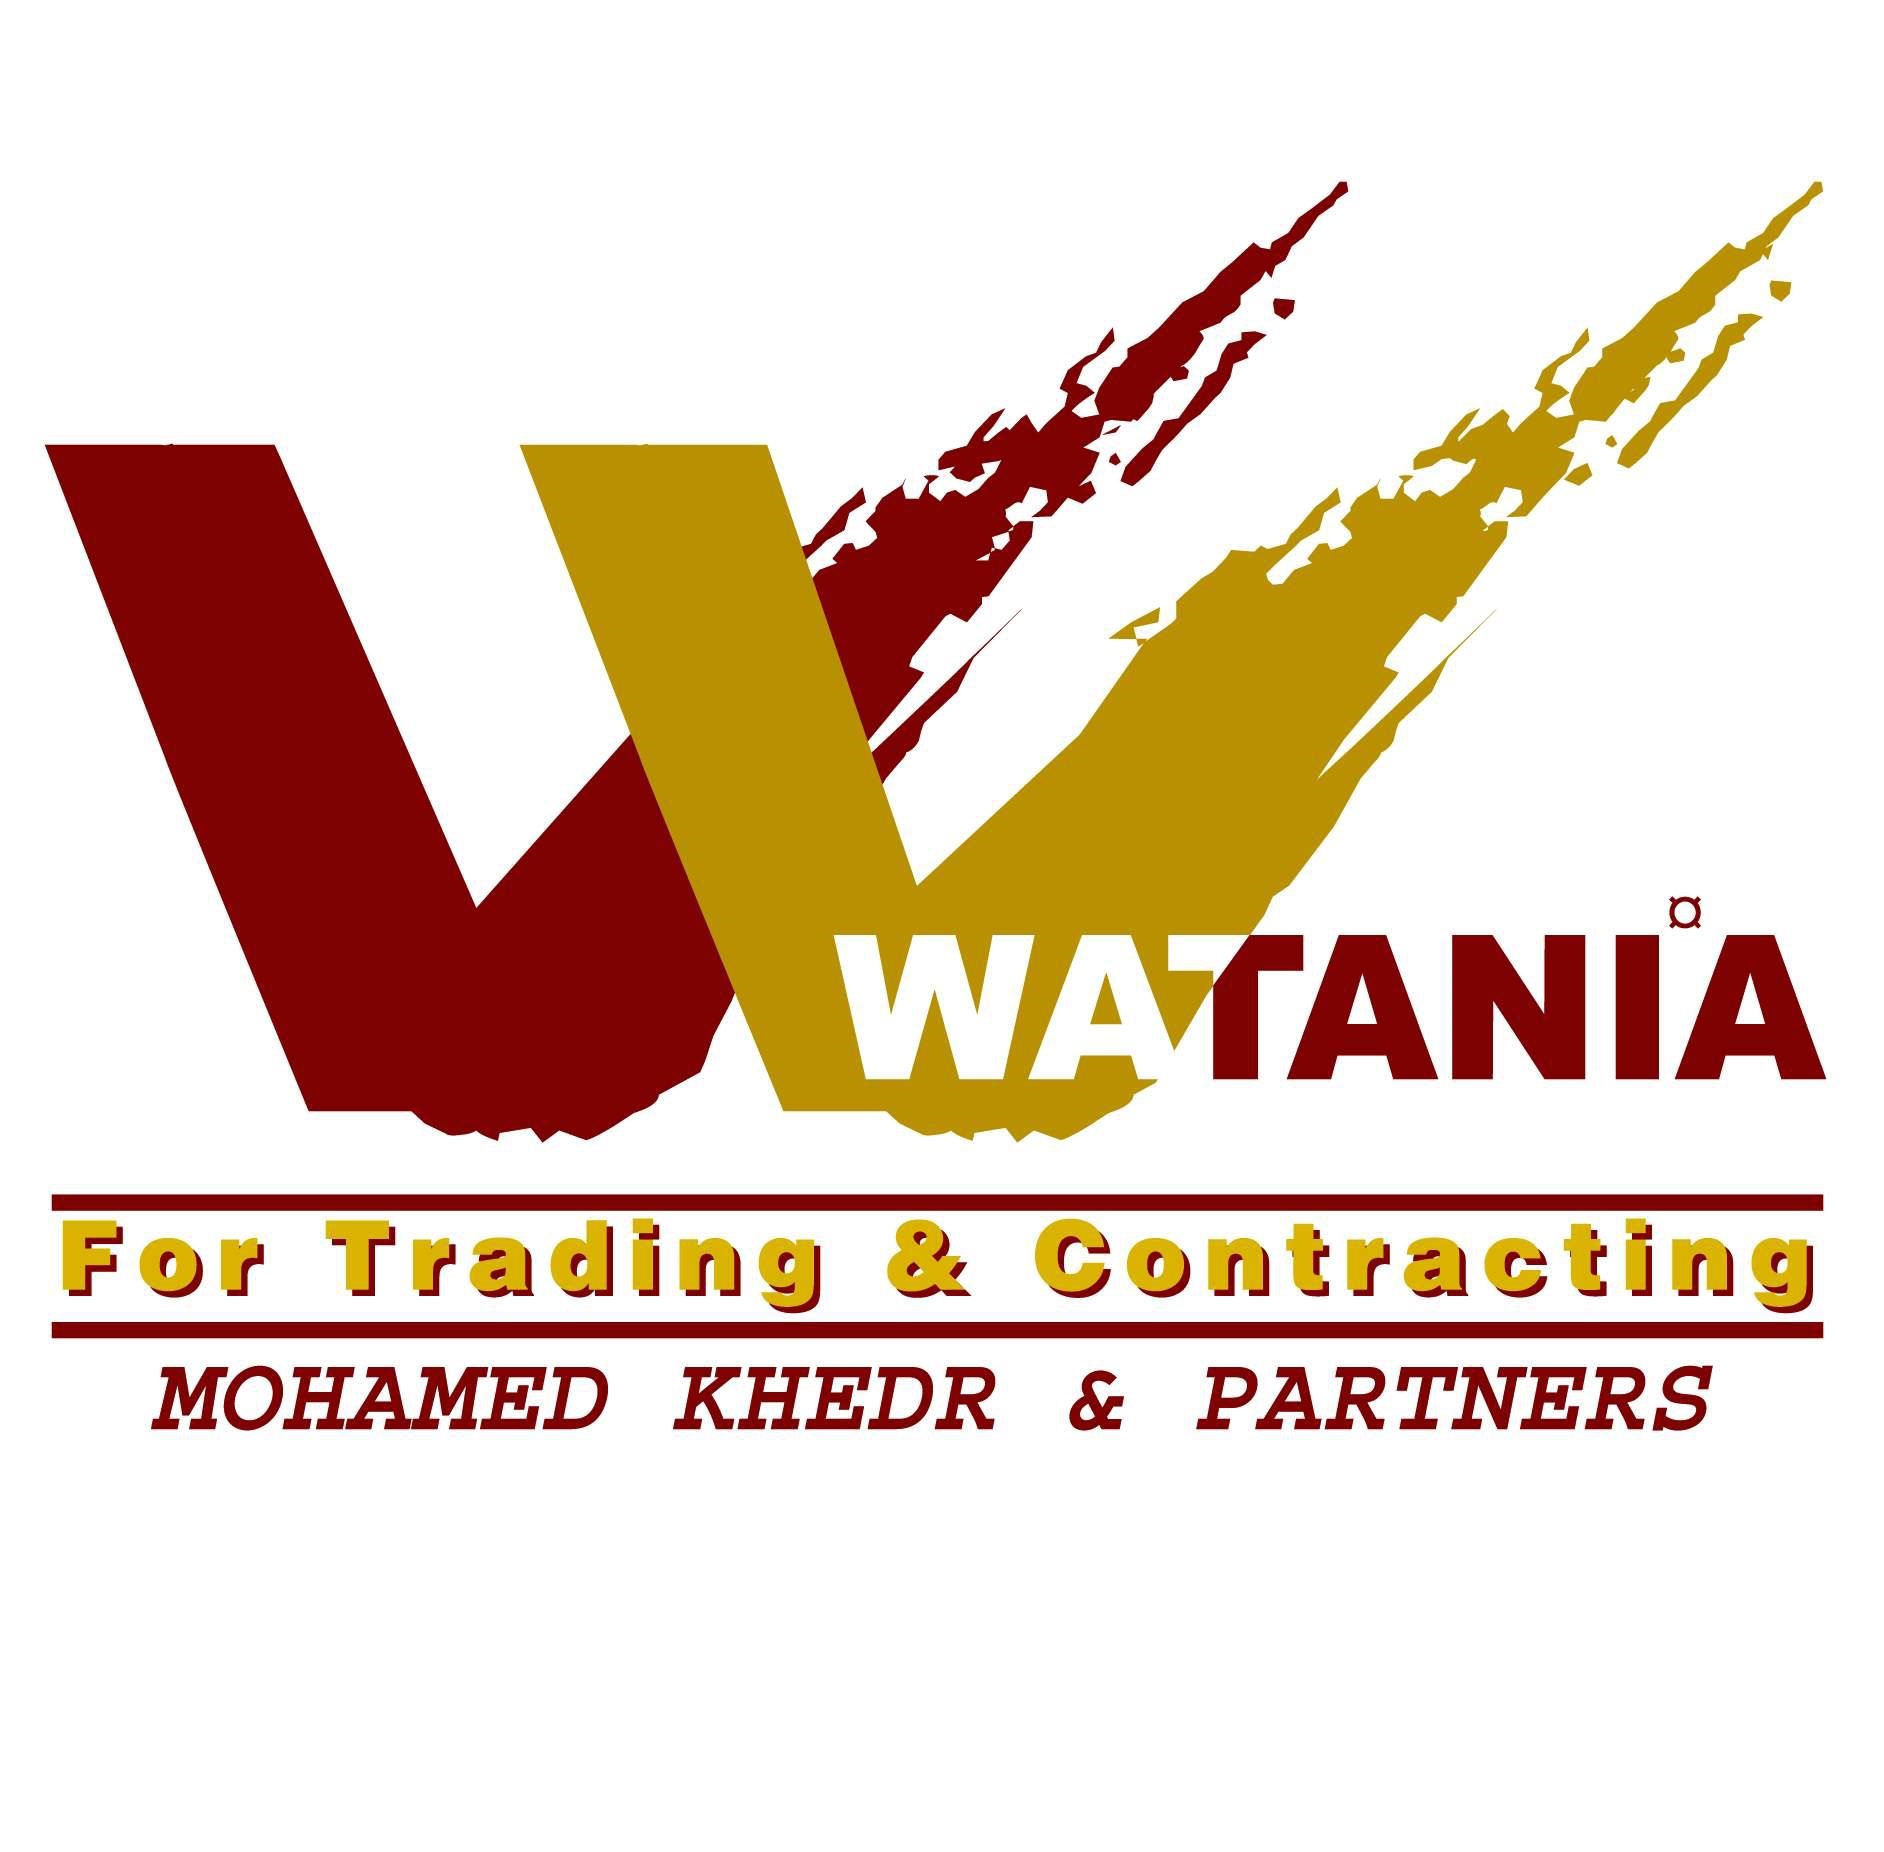 Watania for trading and contracting